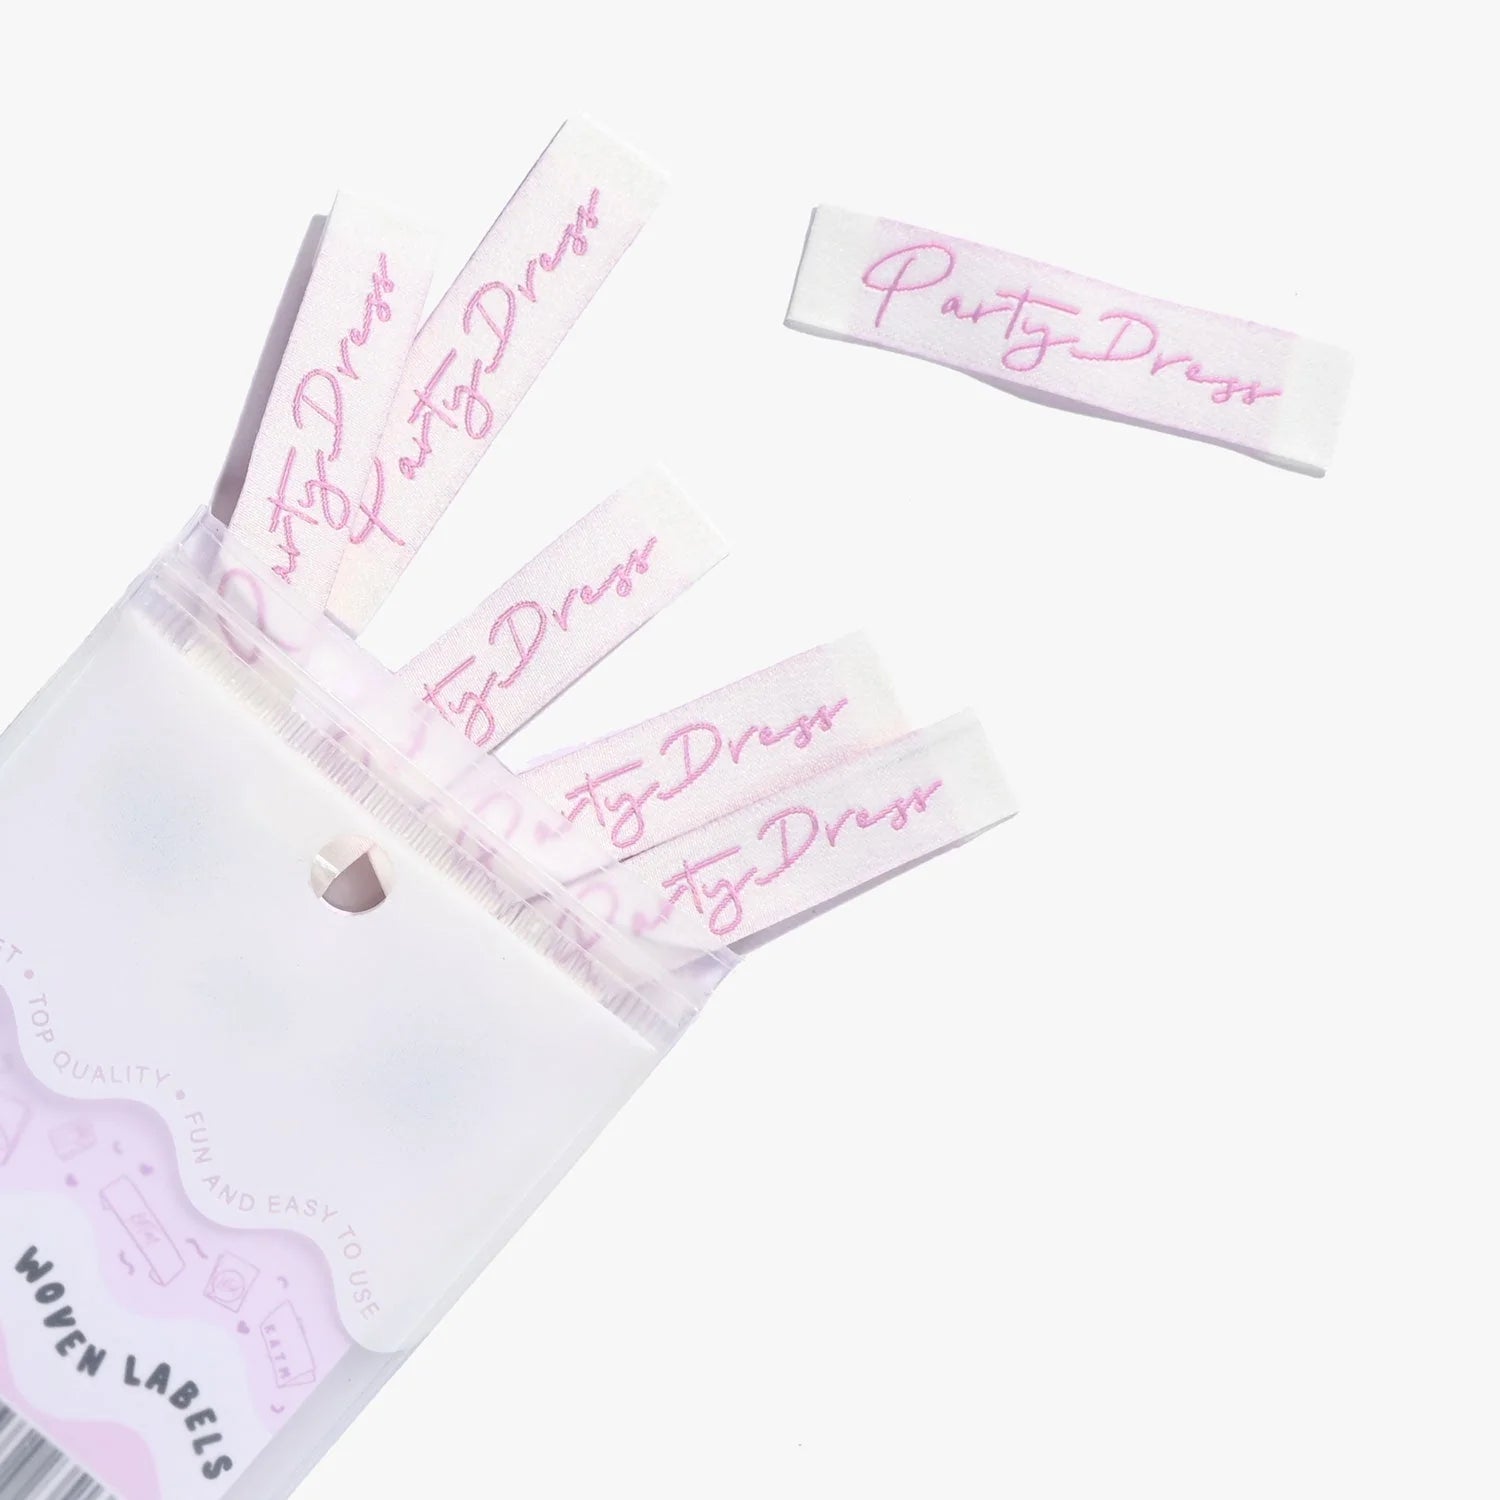 Kylie & The Machine 'Party Dress' Labels